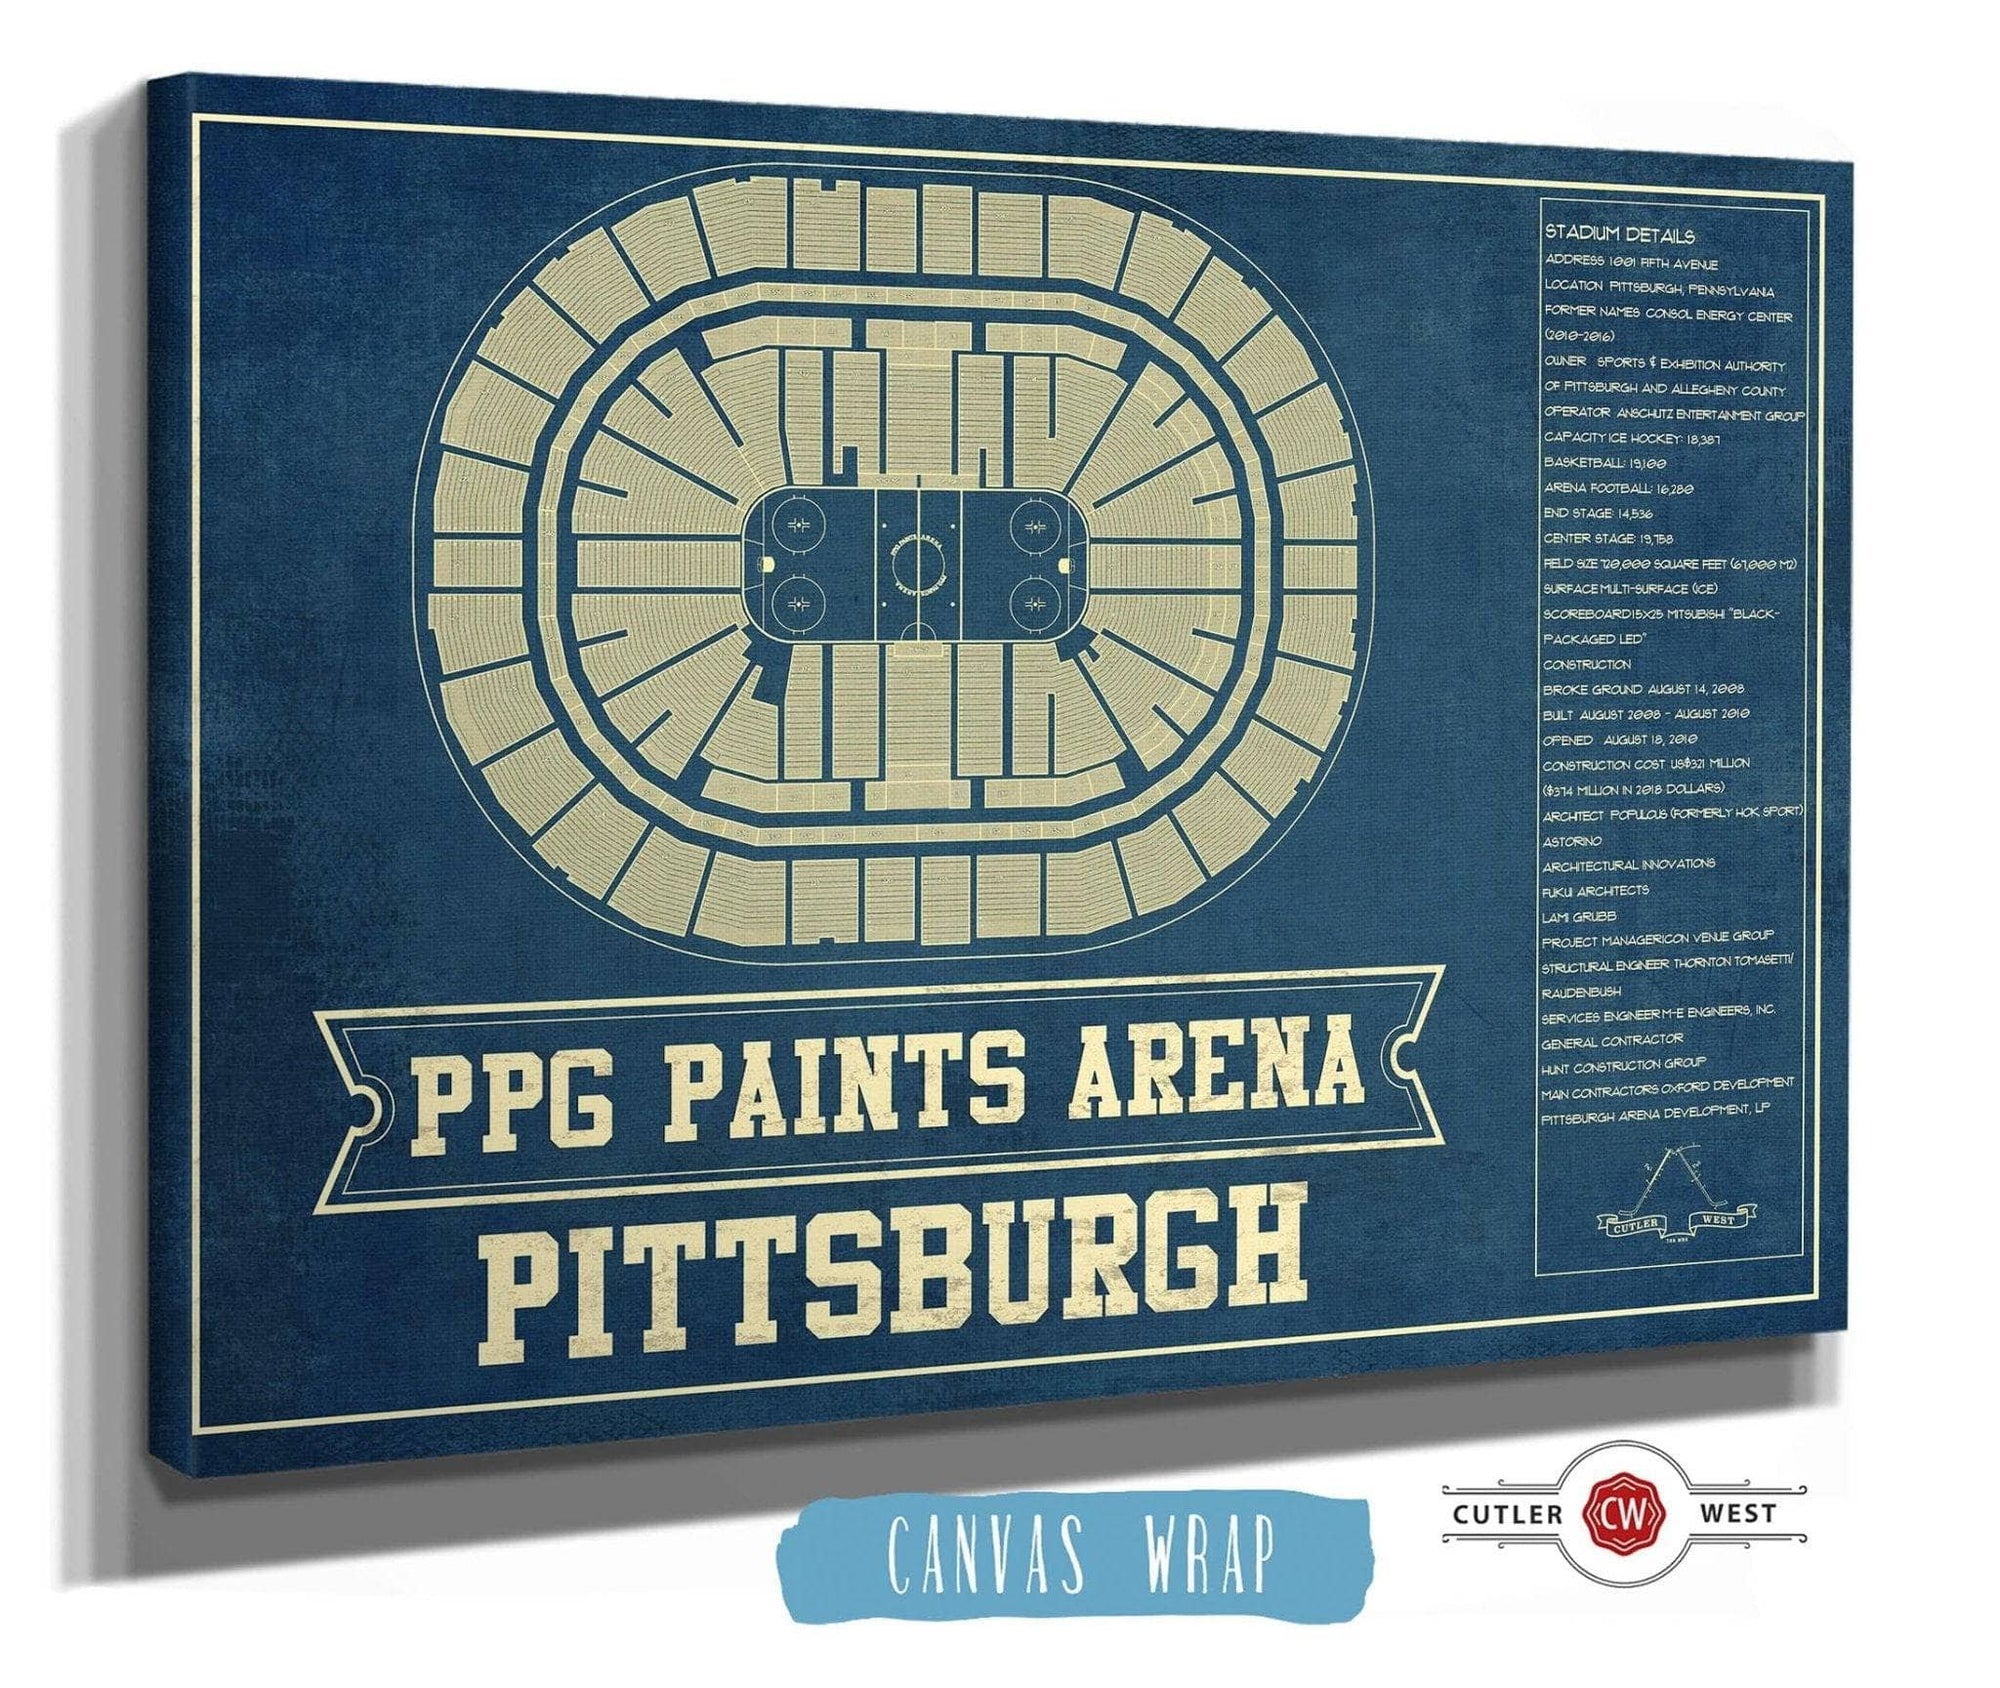 Cutler West 14" x 11" / Stretched Canvas Wrap Pittsburgh Penguins PPG Paints Arena Seating Chart - Vintage Hockey Print 659983736_80857